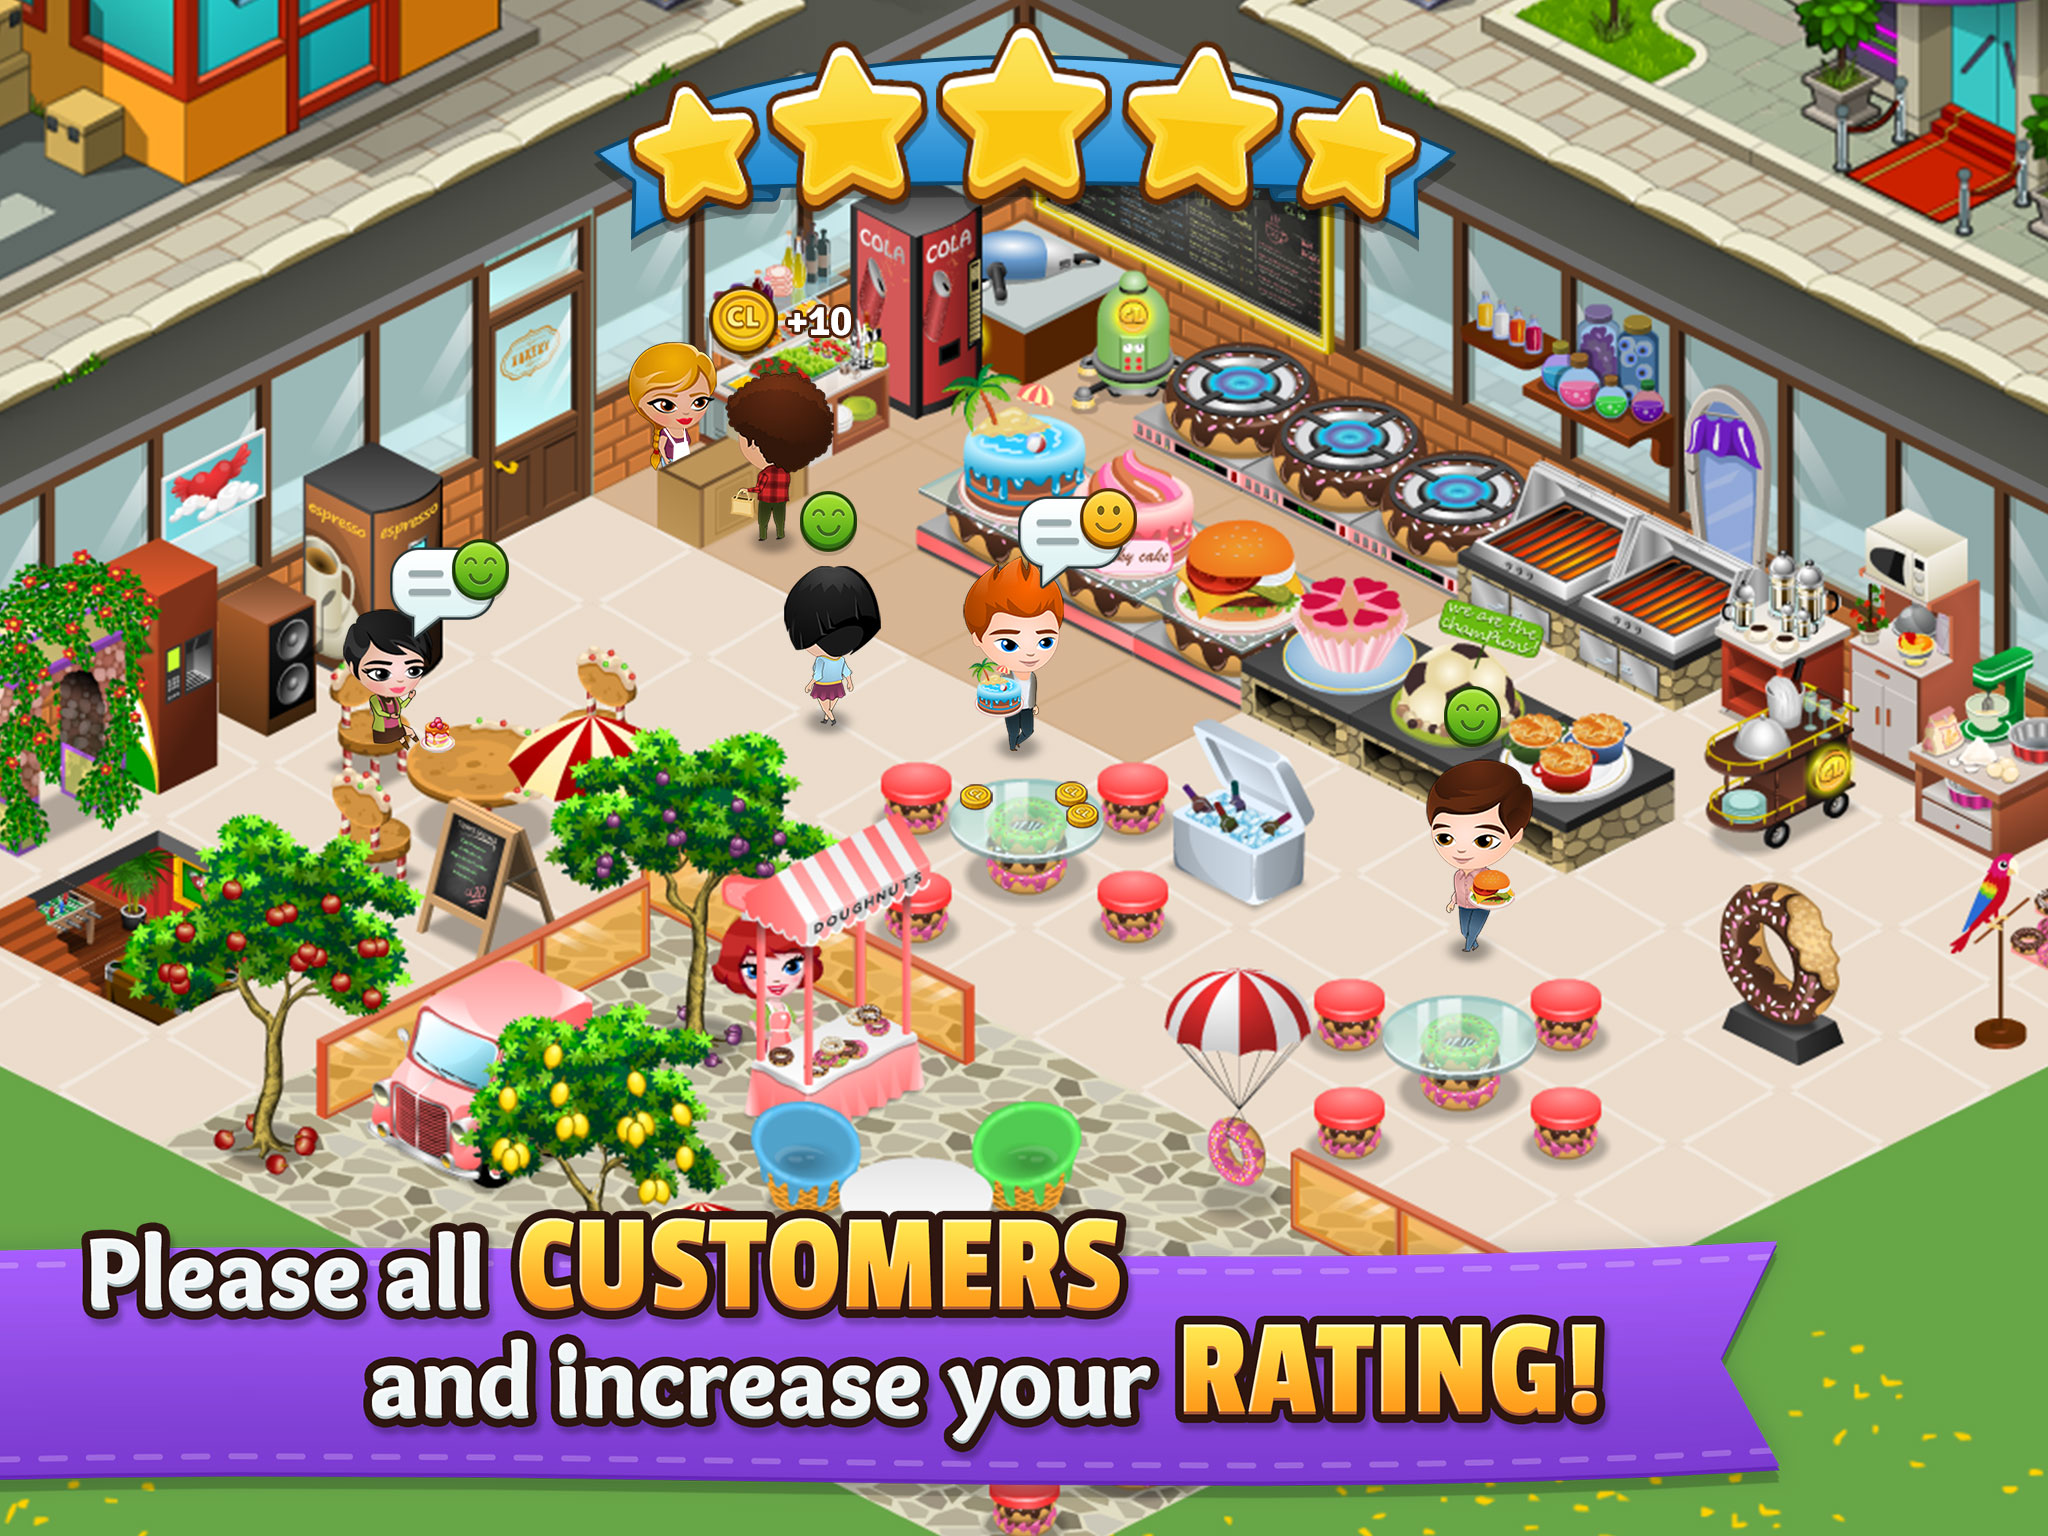 Please all CUSTOMERS and increase your RATING!